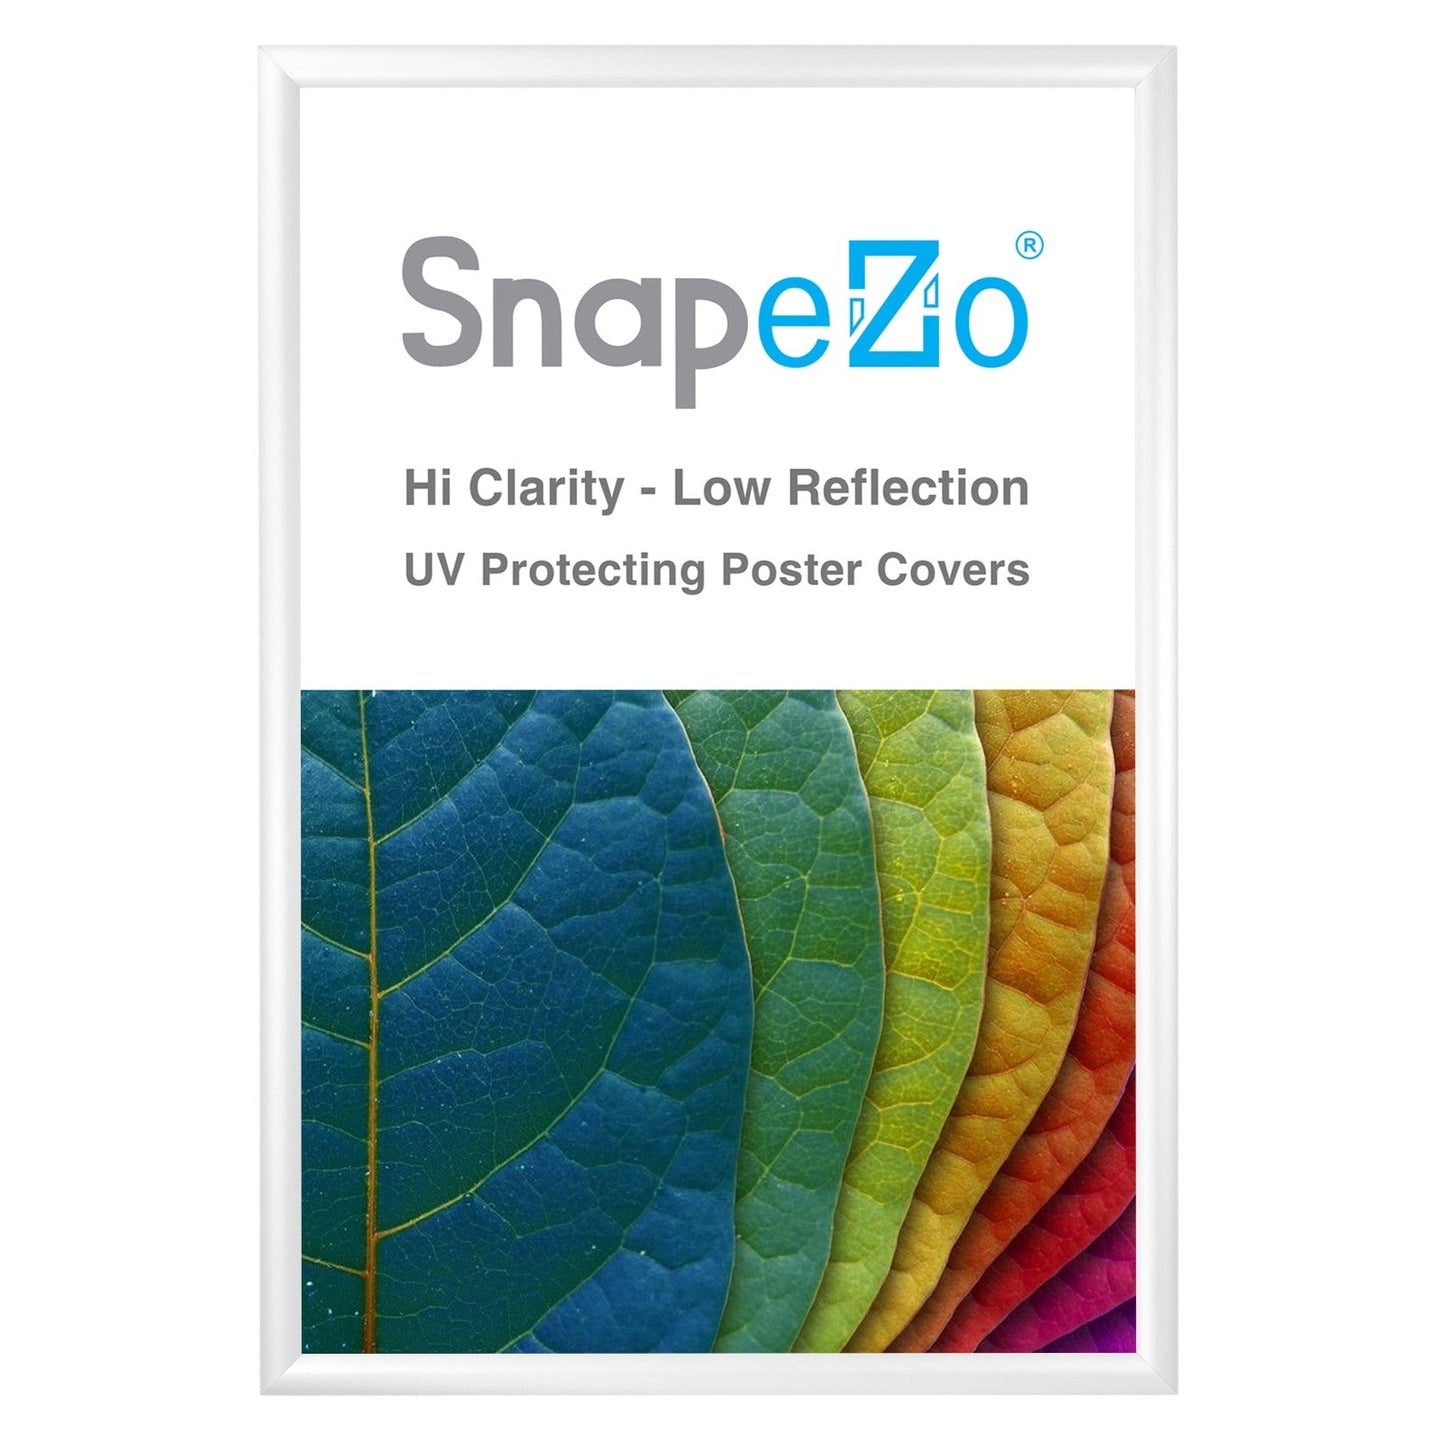 Load image into Gallery viewer, 28x42 White SnapeZo® Snap Frame - 1.2&amp;quot; Profile
